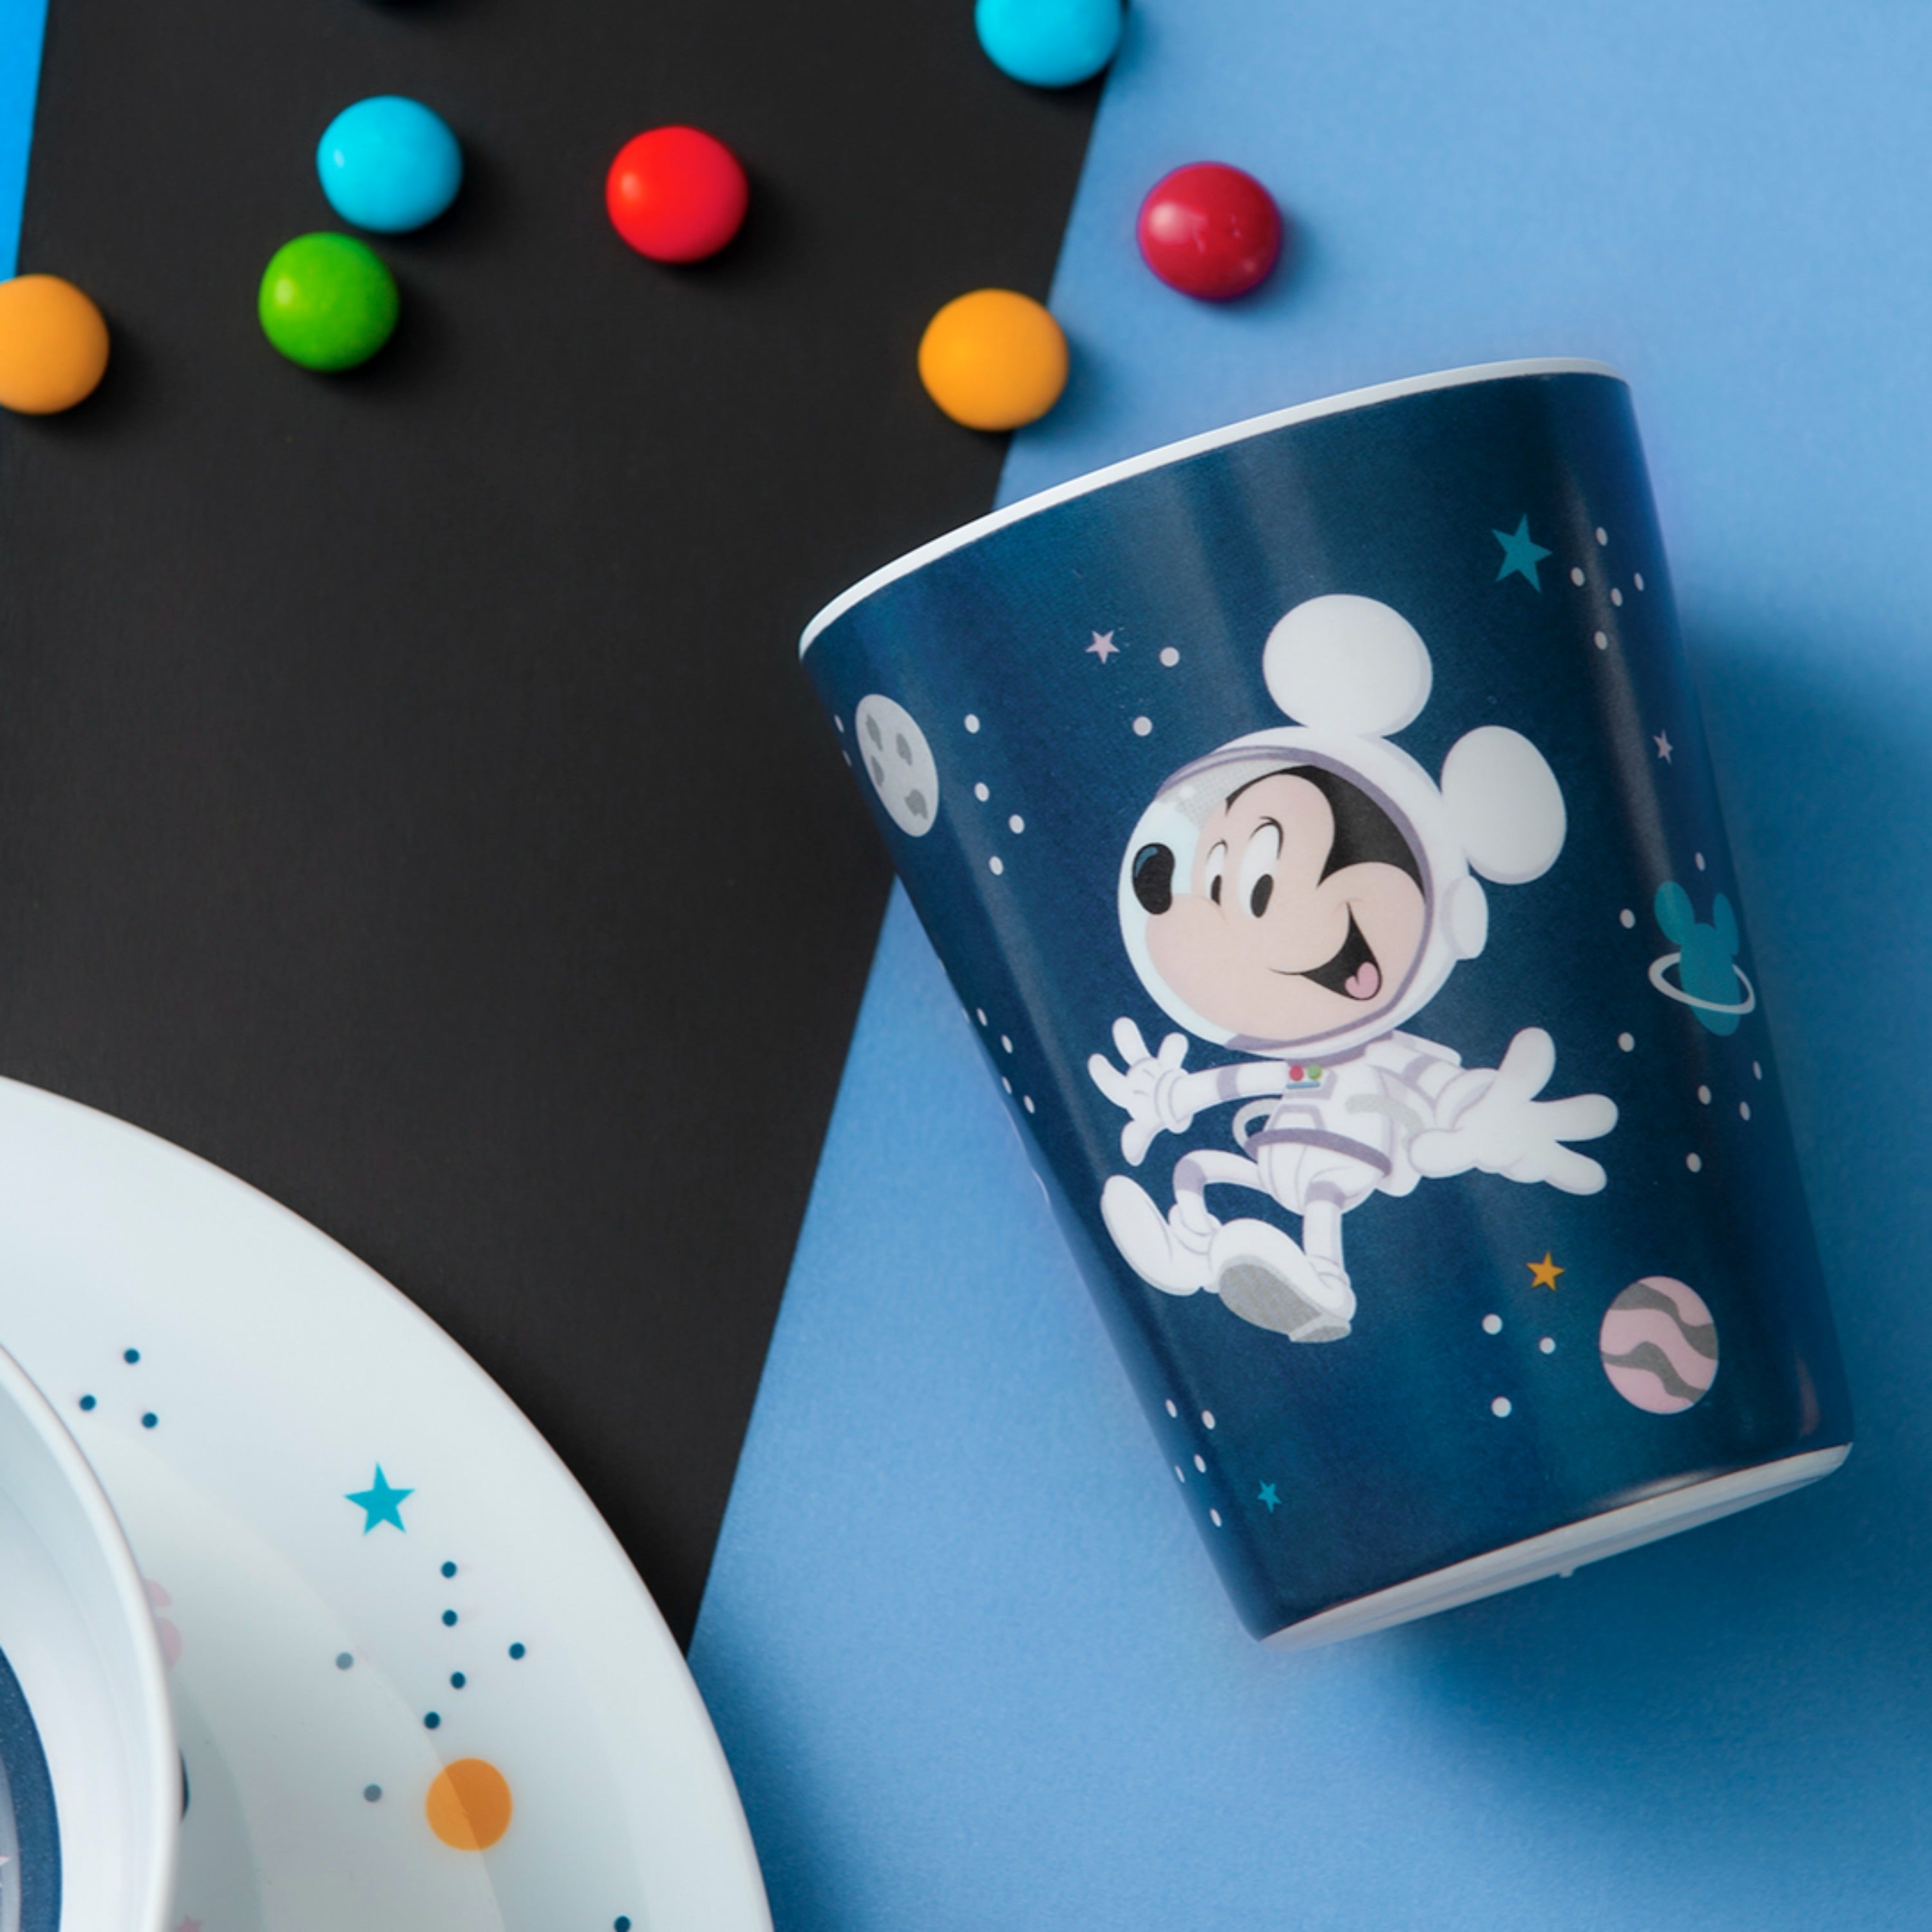 Disney Mickey Mouse 5 Piece Durable Dinnerware Set with Tumbler